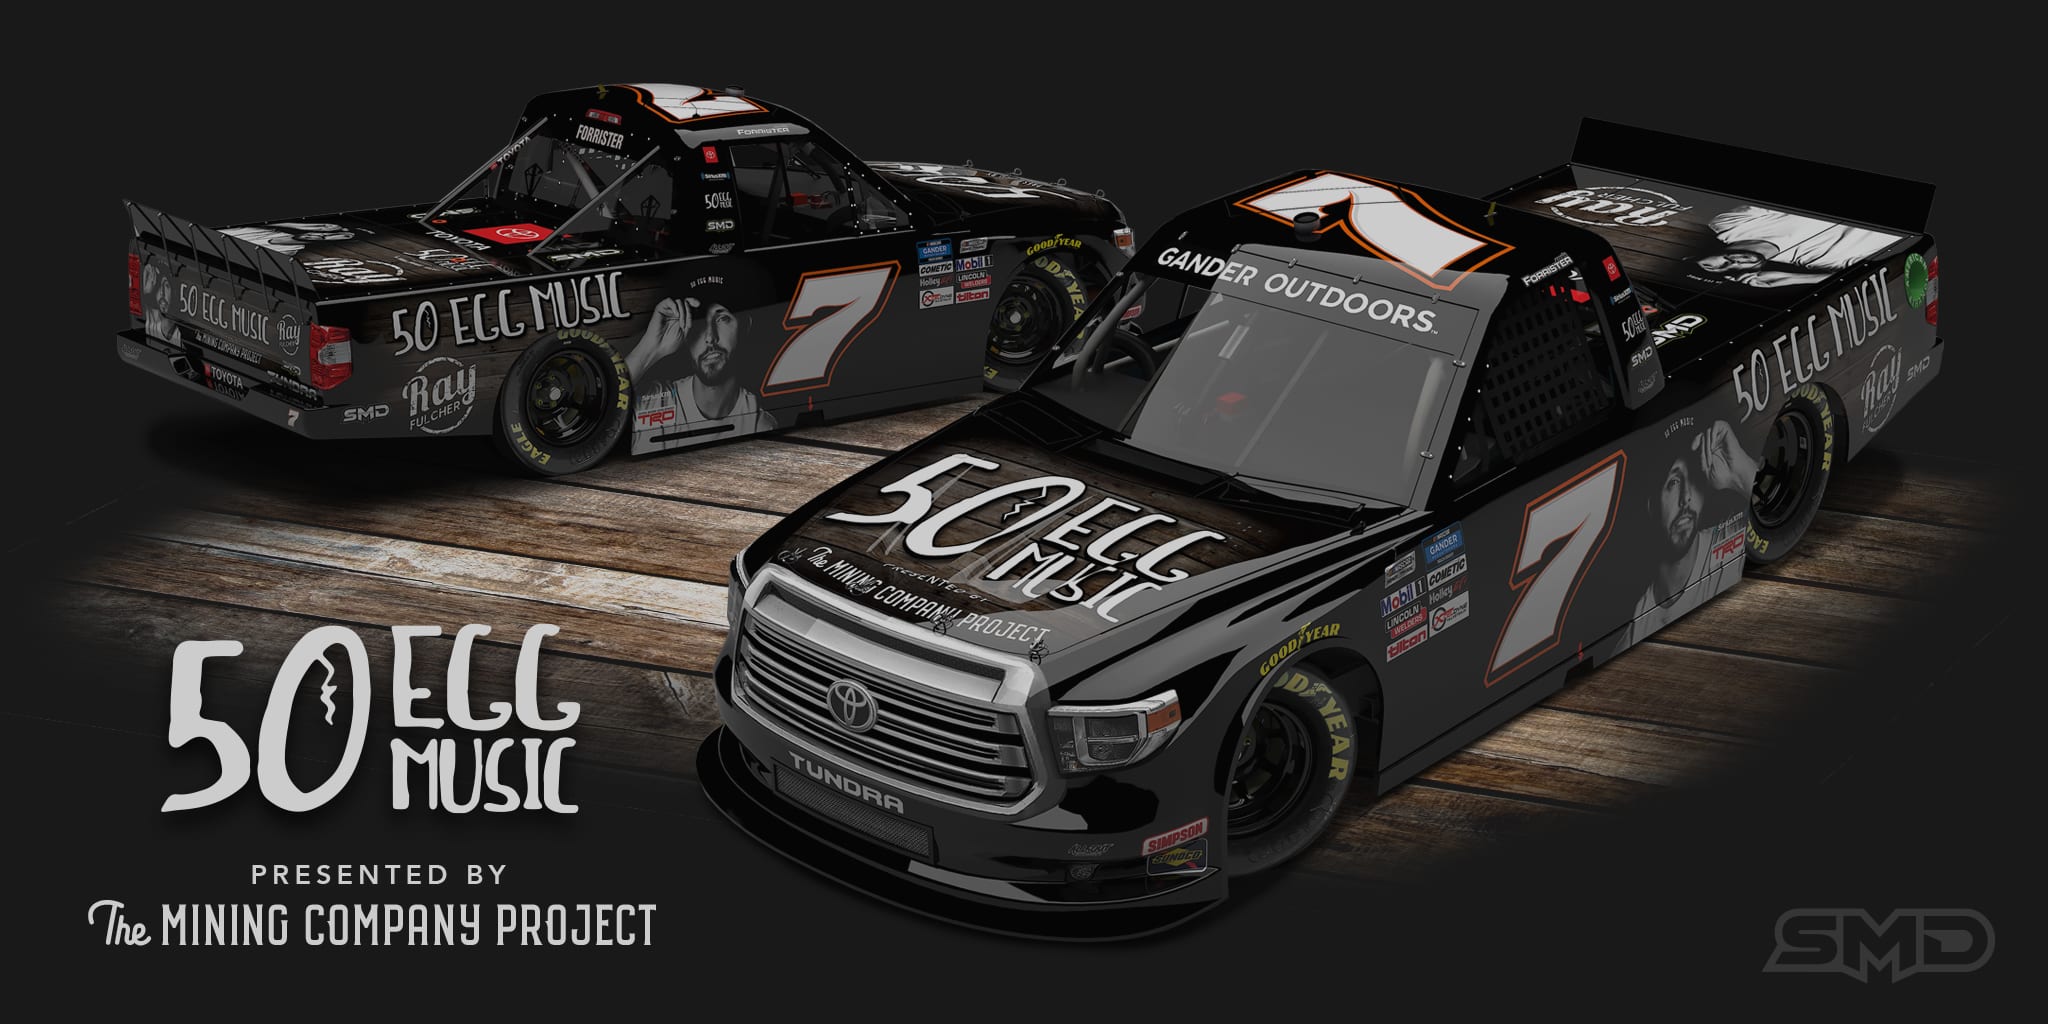 50 Egg Music and The Mining Company Project will support Korbin Forrister and All Out Motorsports at Daytona Int'l Speedway.